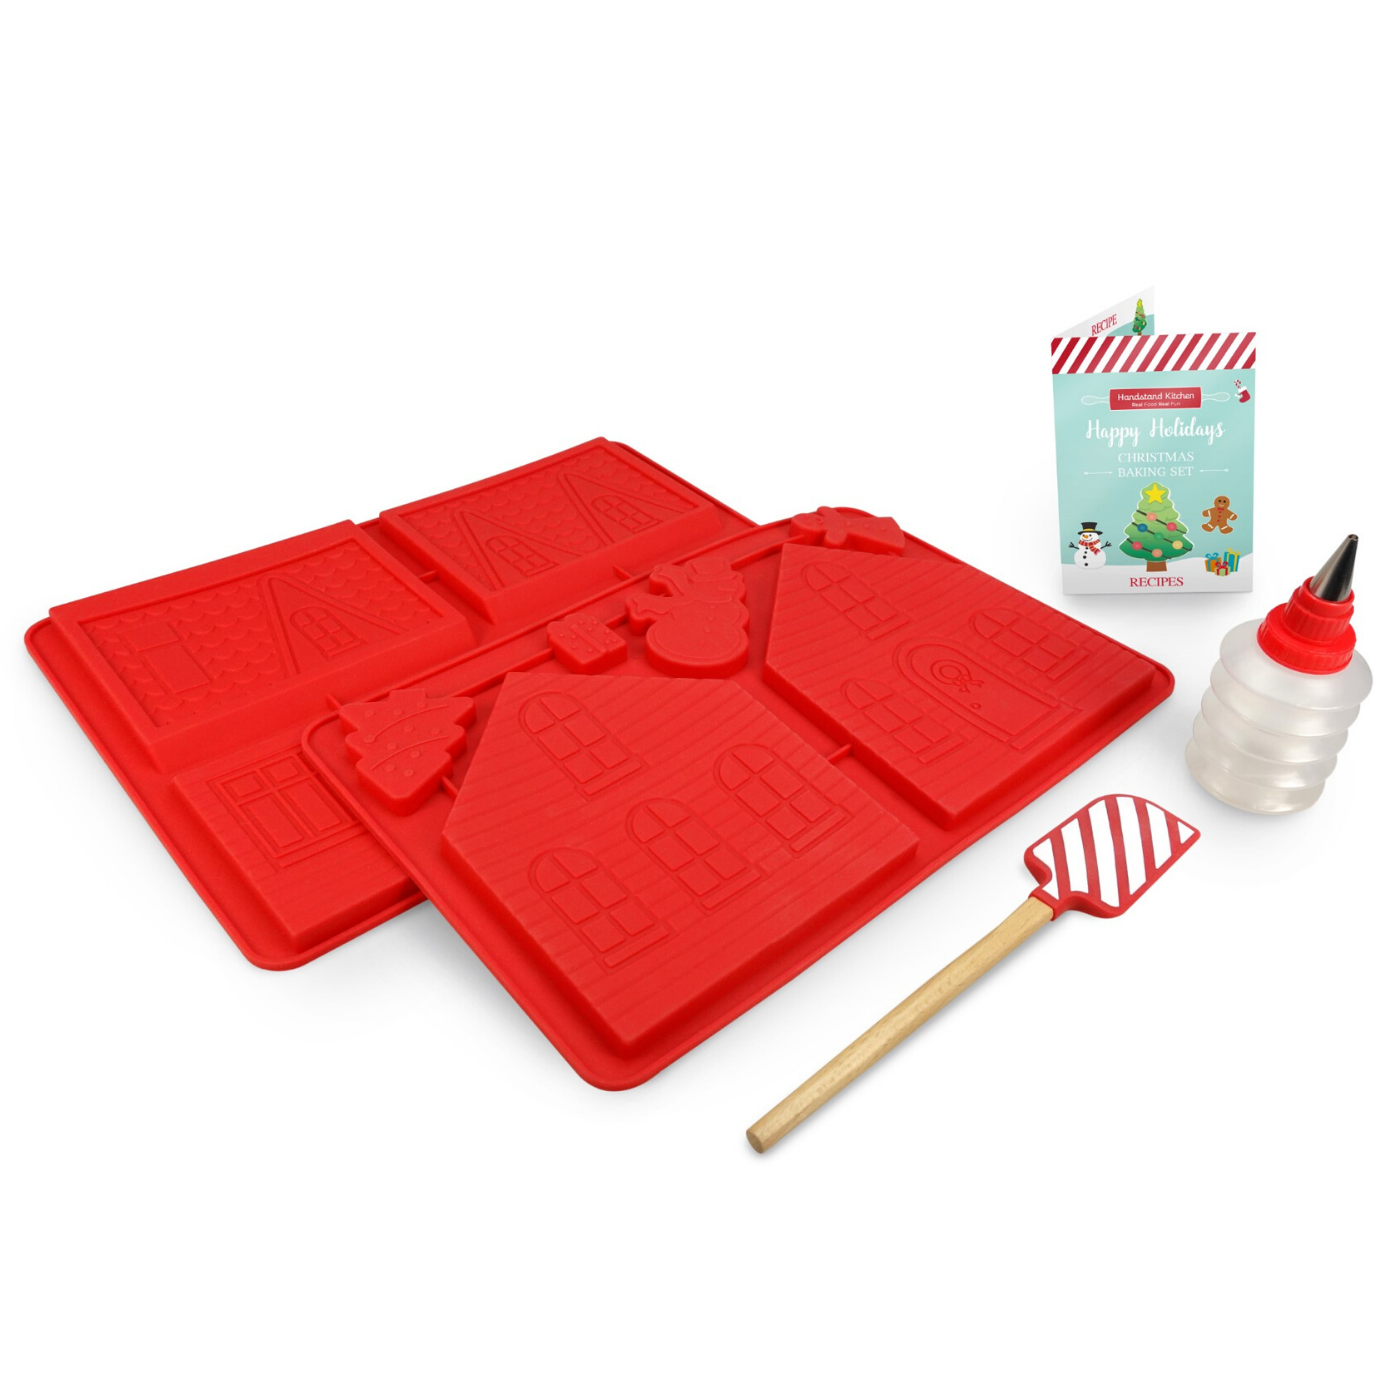 Out of box image of Make Your Own Gingerbread House Set including: 2 silicone gingerbread house molds,  1 striped silicone spatula, 1 frosting bottle with  tip, recipes and building instructions.